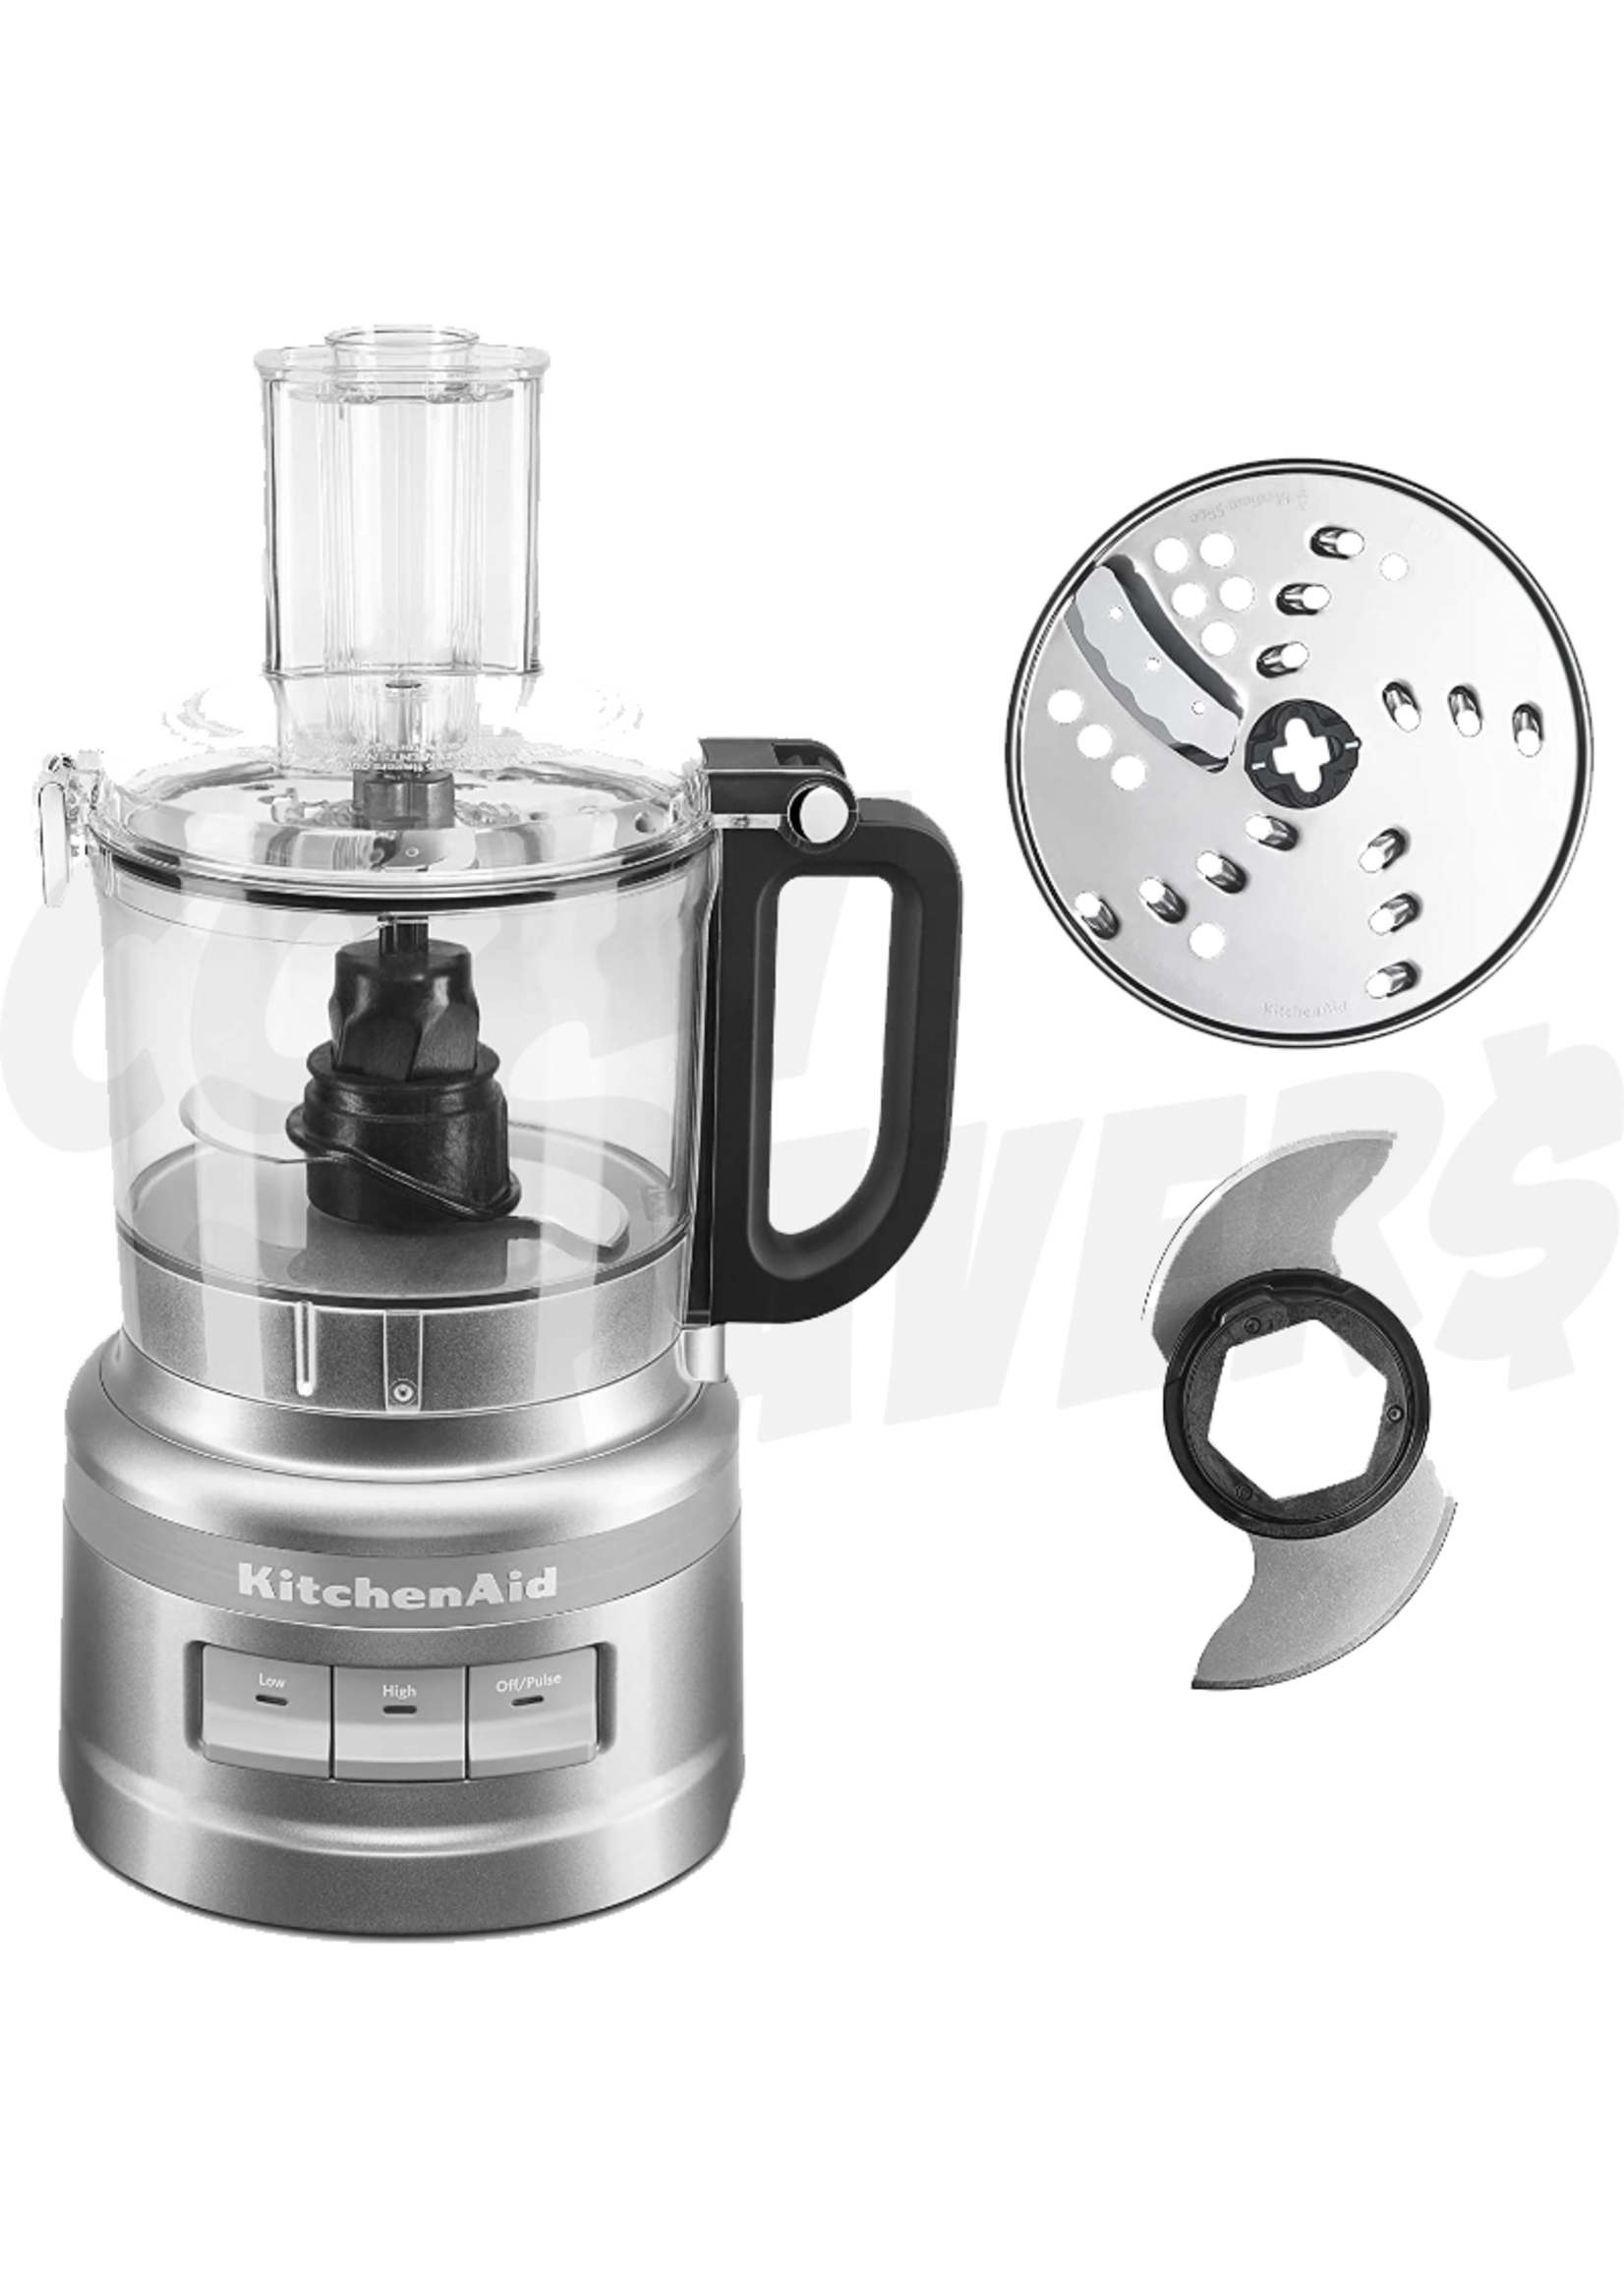 Kitchen Aid Kitchen Aid 7 Cup Food Processor (Silver)